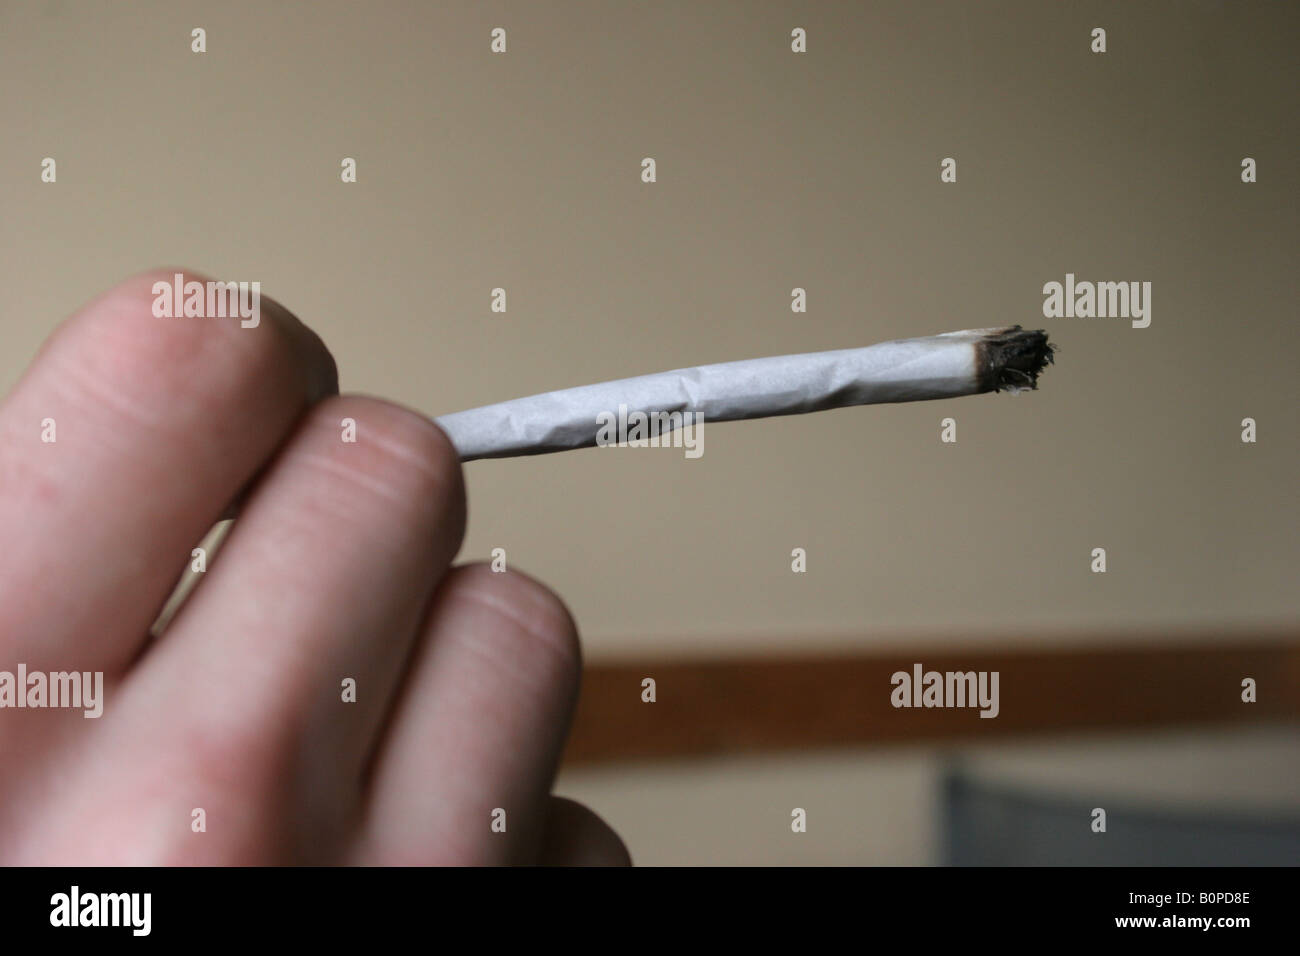 A cannabis spliff cigarette or joint being smoked, Amsterdam, Holland, The Netherlands. Stock Photo